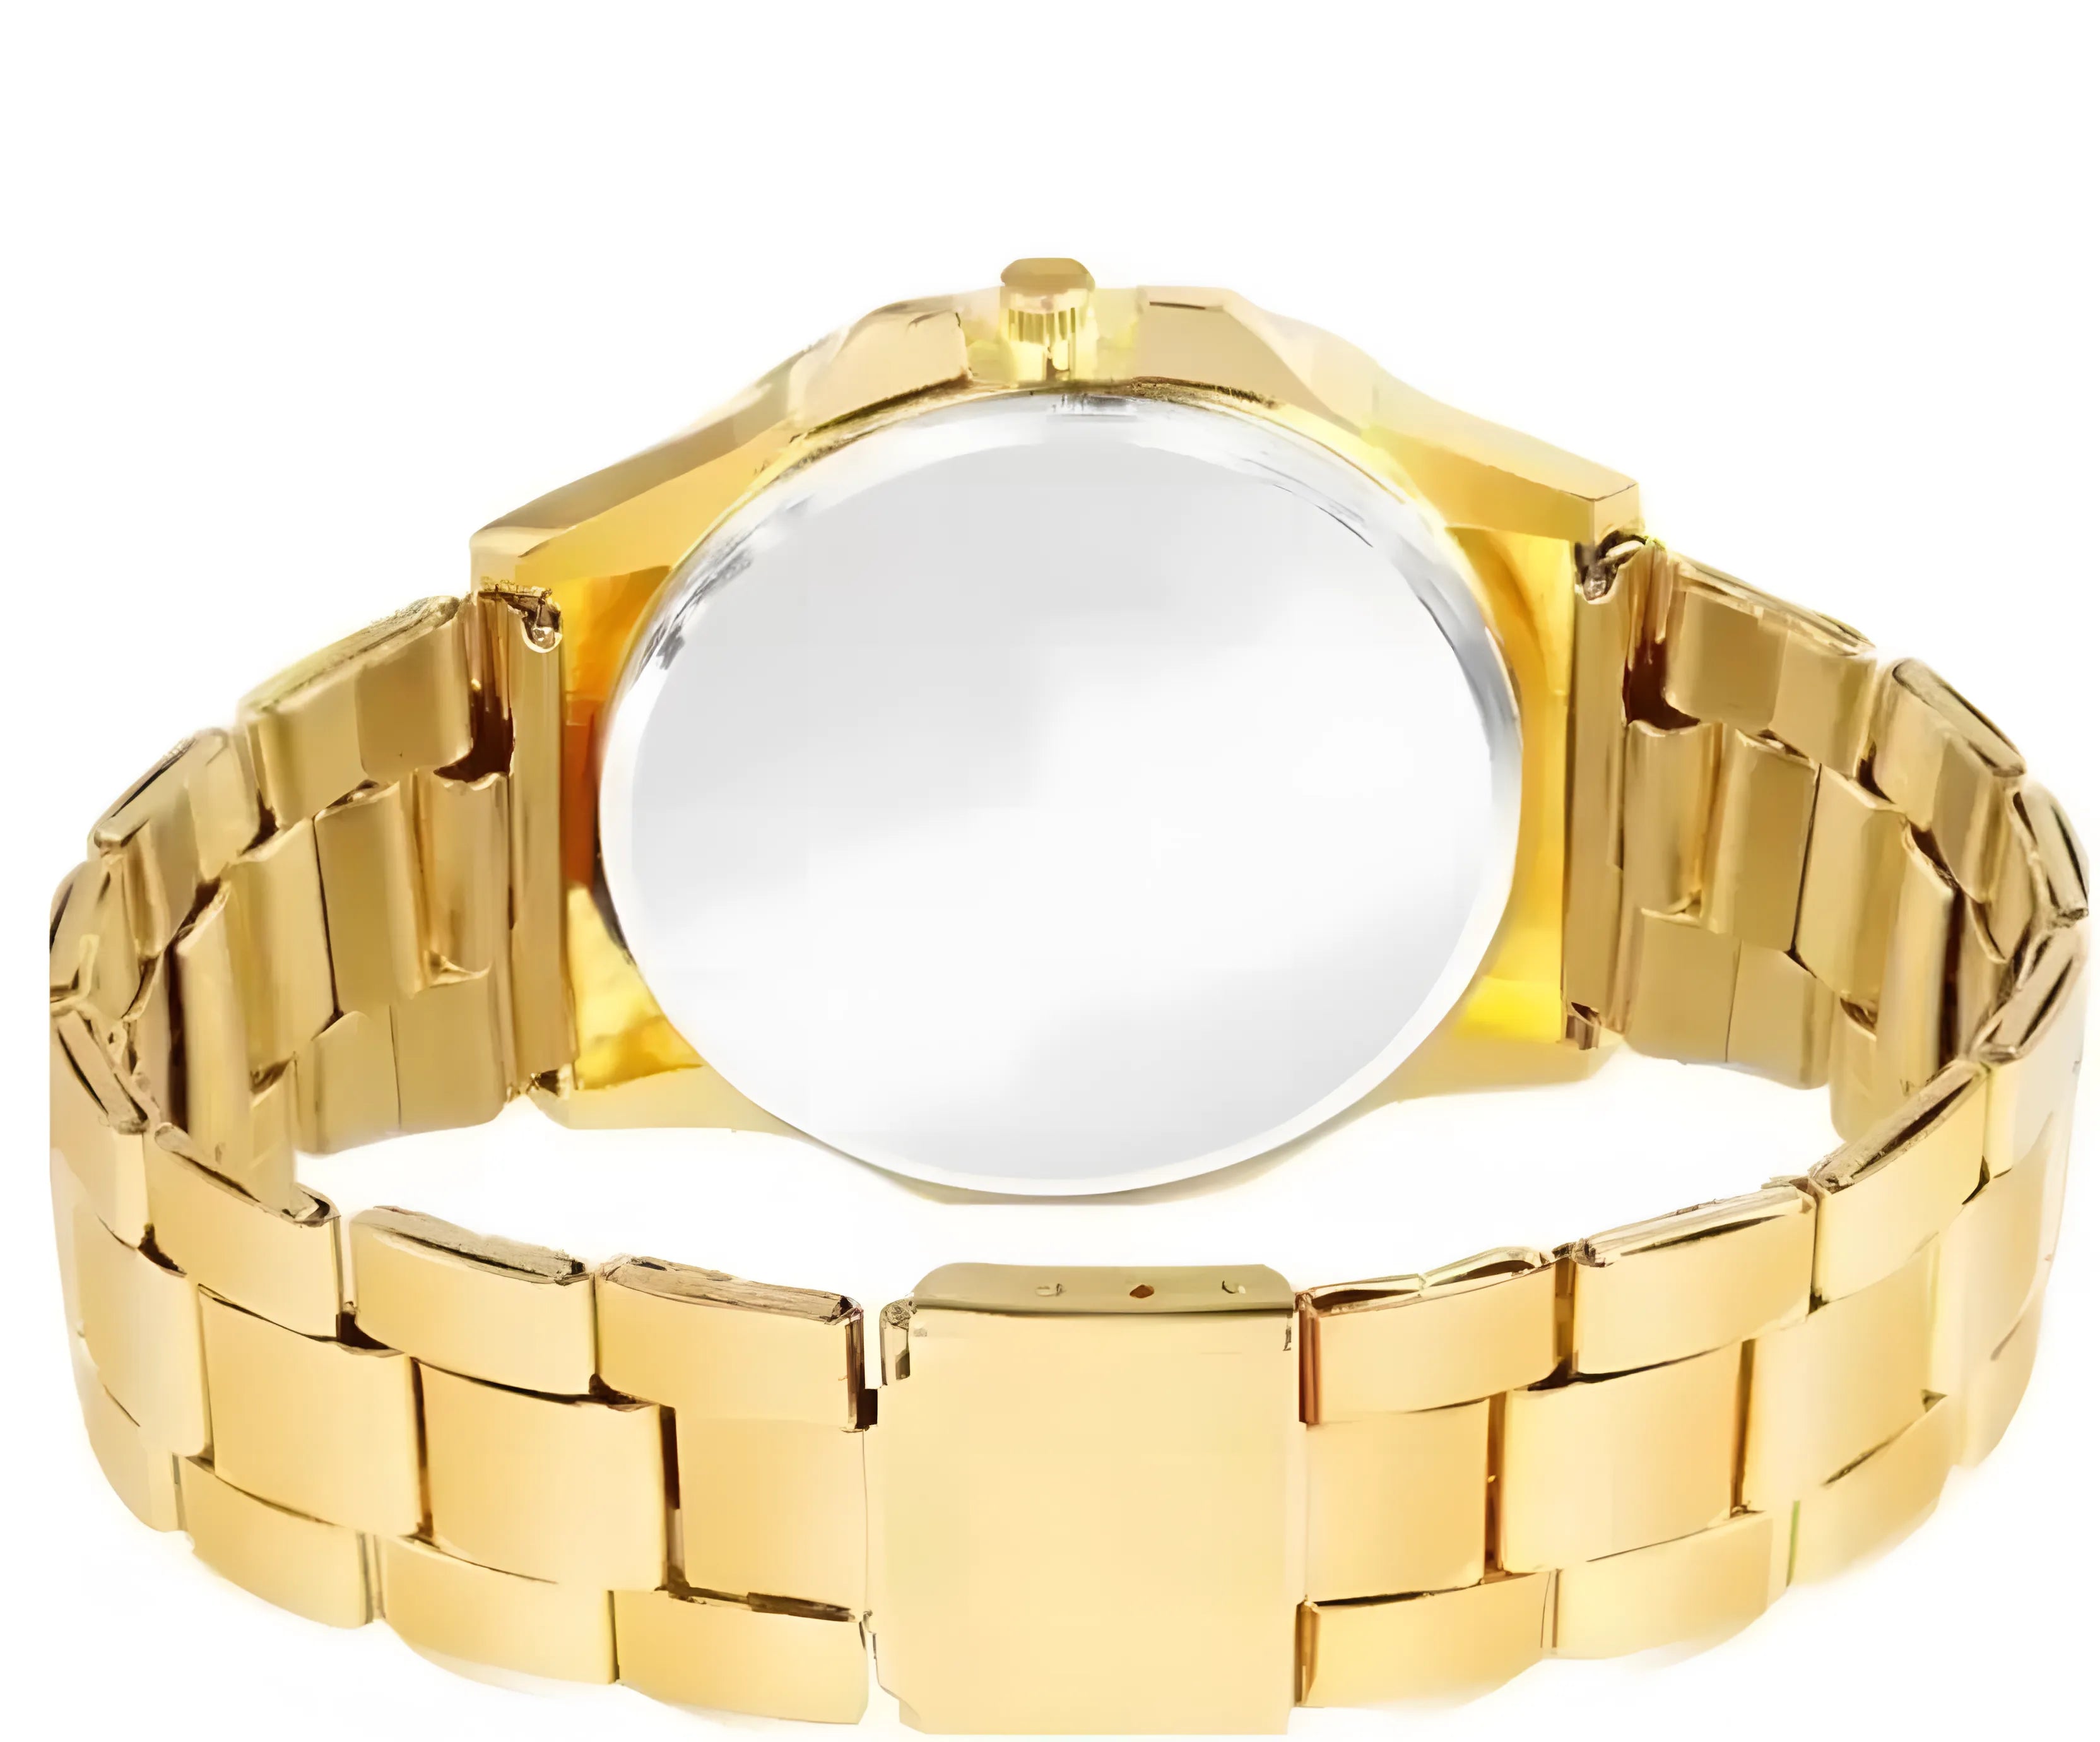 Limited Edition: Golden Stone Studded Diamond Wrist Watch For Him